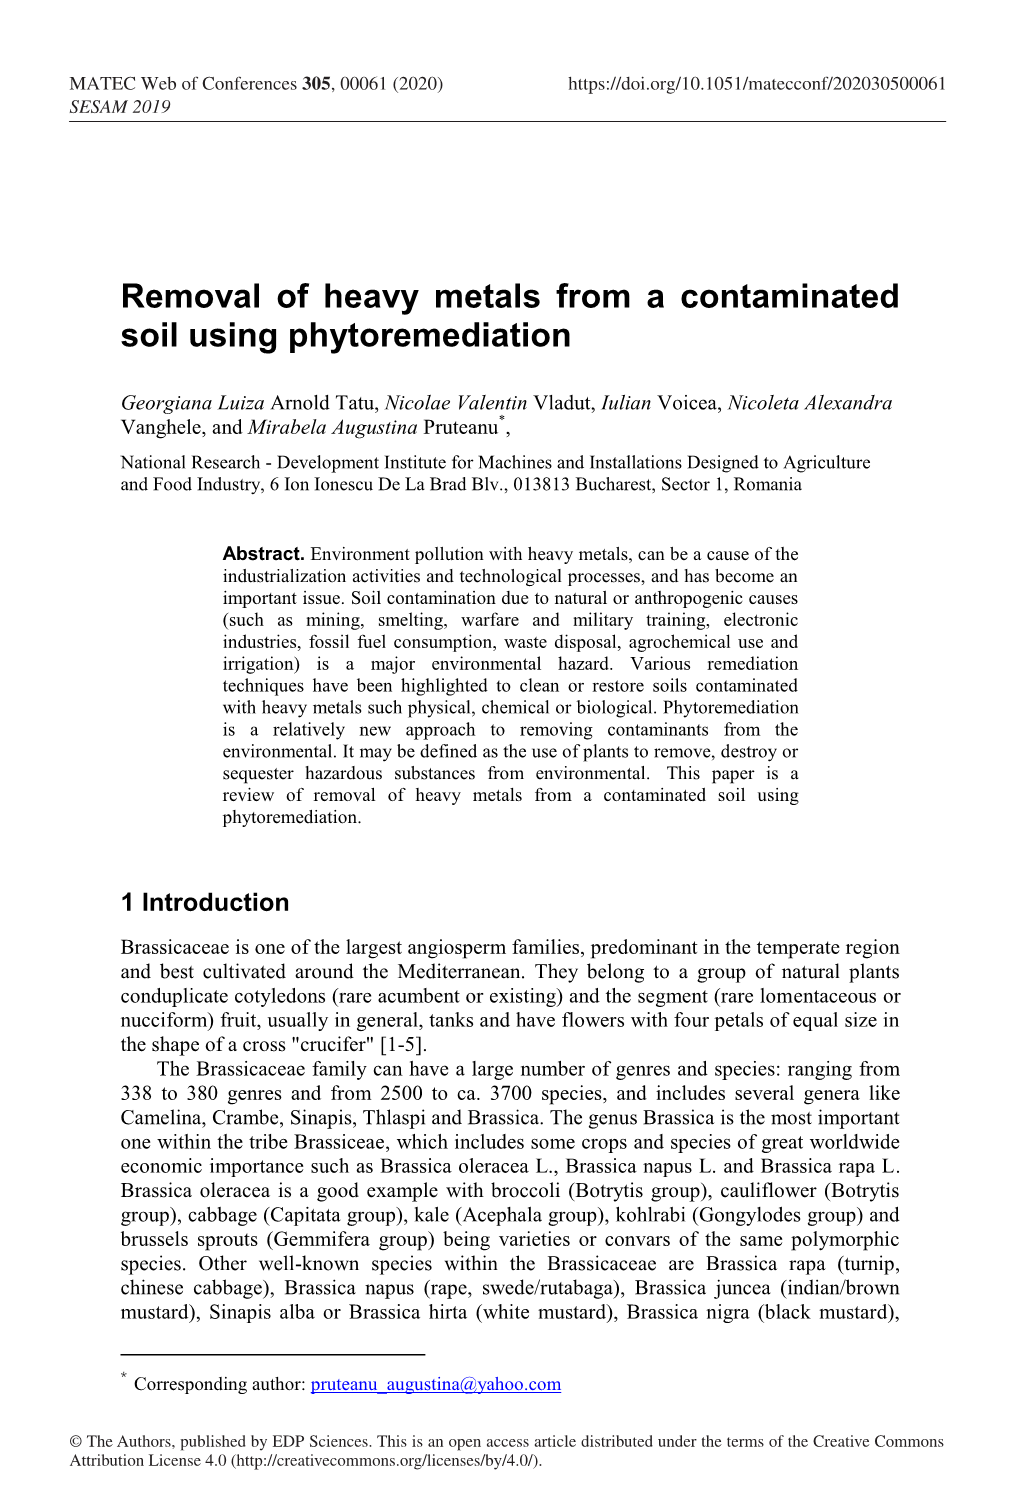 Removal of Heavy Metals from a Contaminated Soil Using Phytoremediation